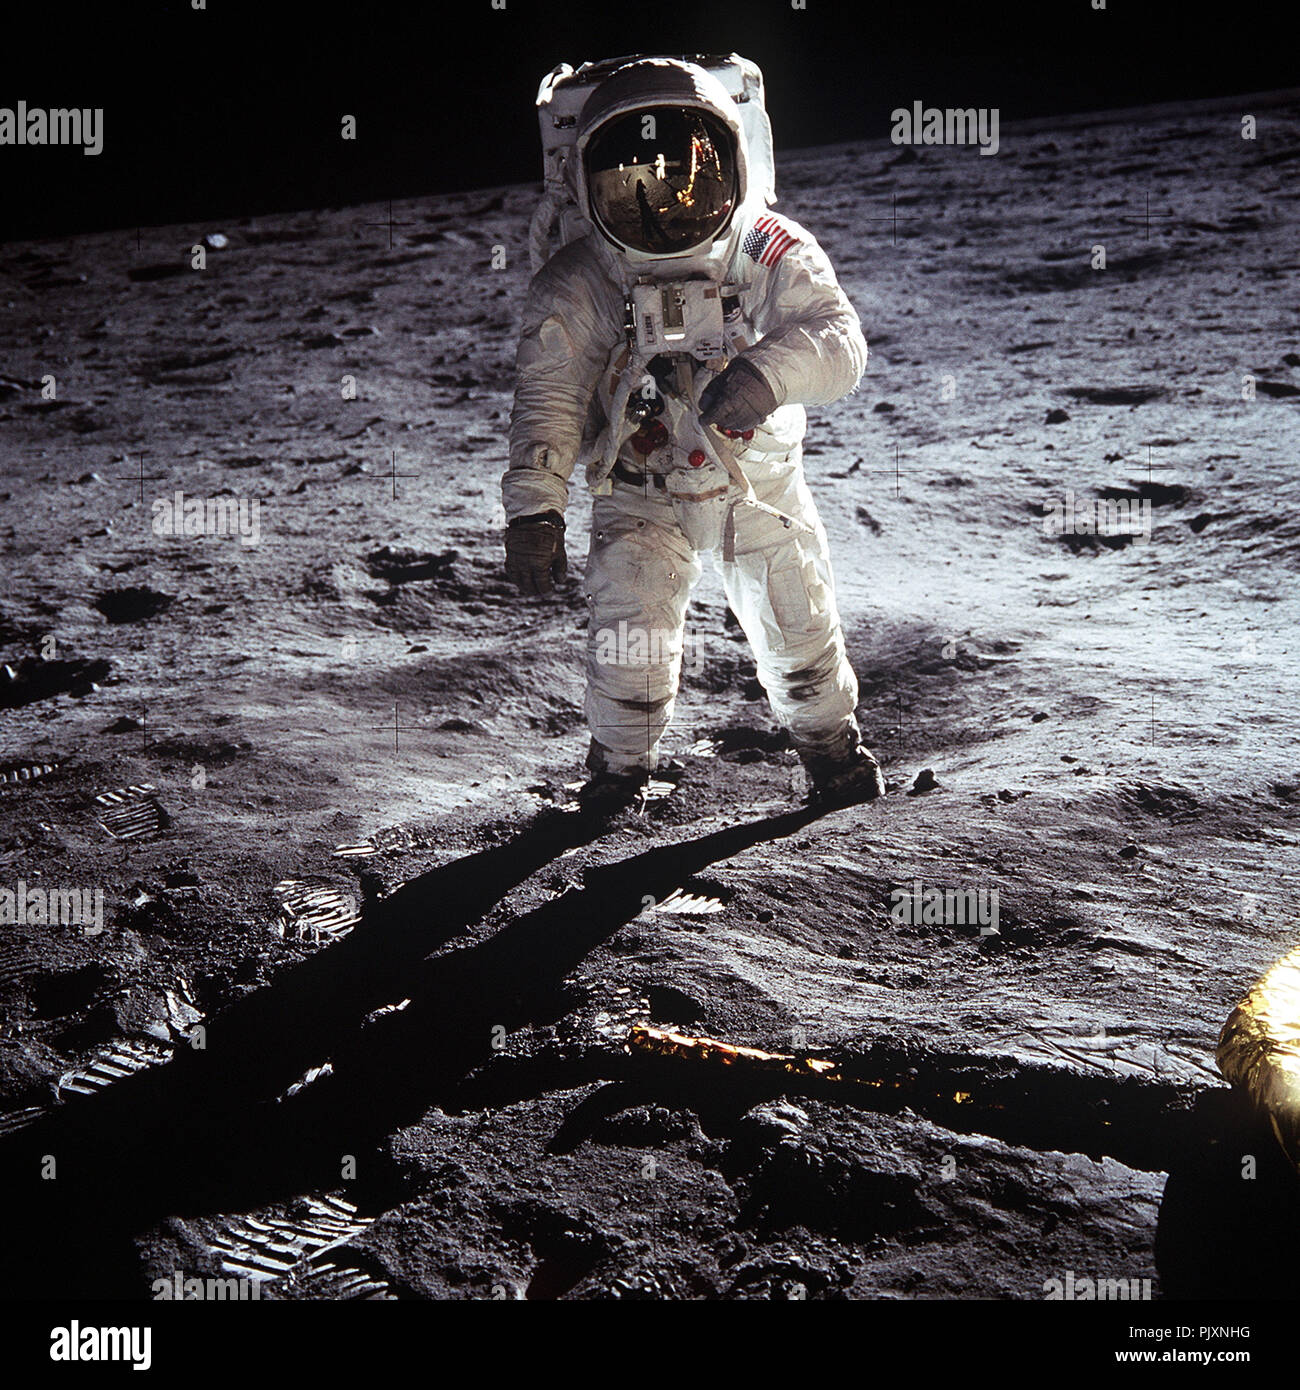 The Moon - (FILE) -- Astronaut Buzz Aldrin, lunar module pilot, walks on the surface of the Moon near the leg of the Lunar Module (LM) 'Eagle' during the Apollo 11 exravehicular activity (EVA) on Sunday, July 20, 1969. Astronaut Neil A. Armstrong, commander, took this photograph with a 70mm lunar surface camera. While astronauts Armstrong and Aldrin descended in the Lunar Module (LM) 'Eagle' to explore the Sea of Tranquility region of the Moon, astronaut Michael Collins, command module pilot, remained with the Command and Service Modules (CSM) 'Columbia' in lunar orbit. Credit: NASA via CNP /M Stock Photo